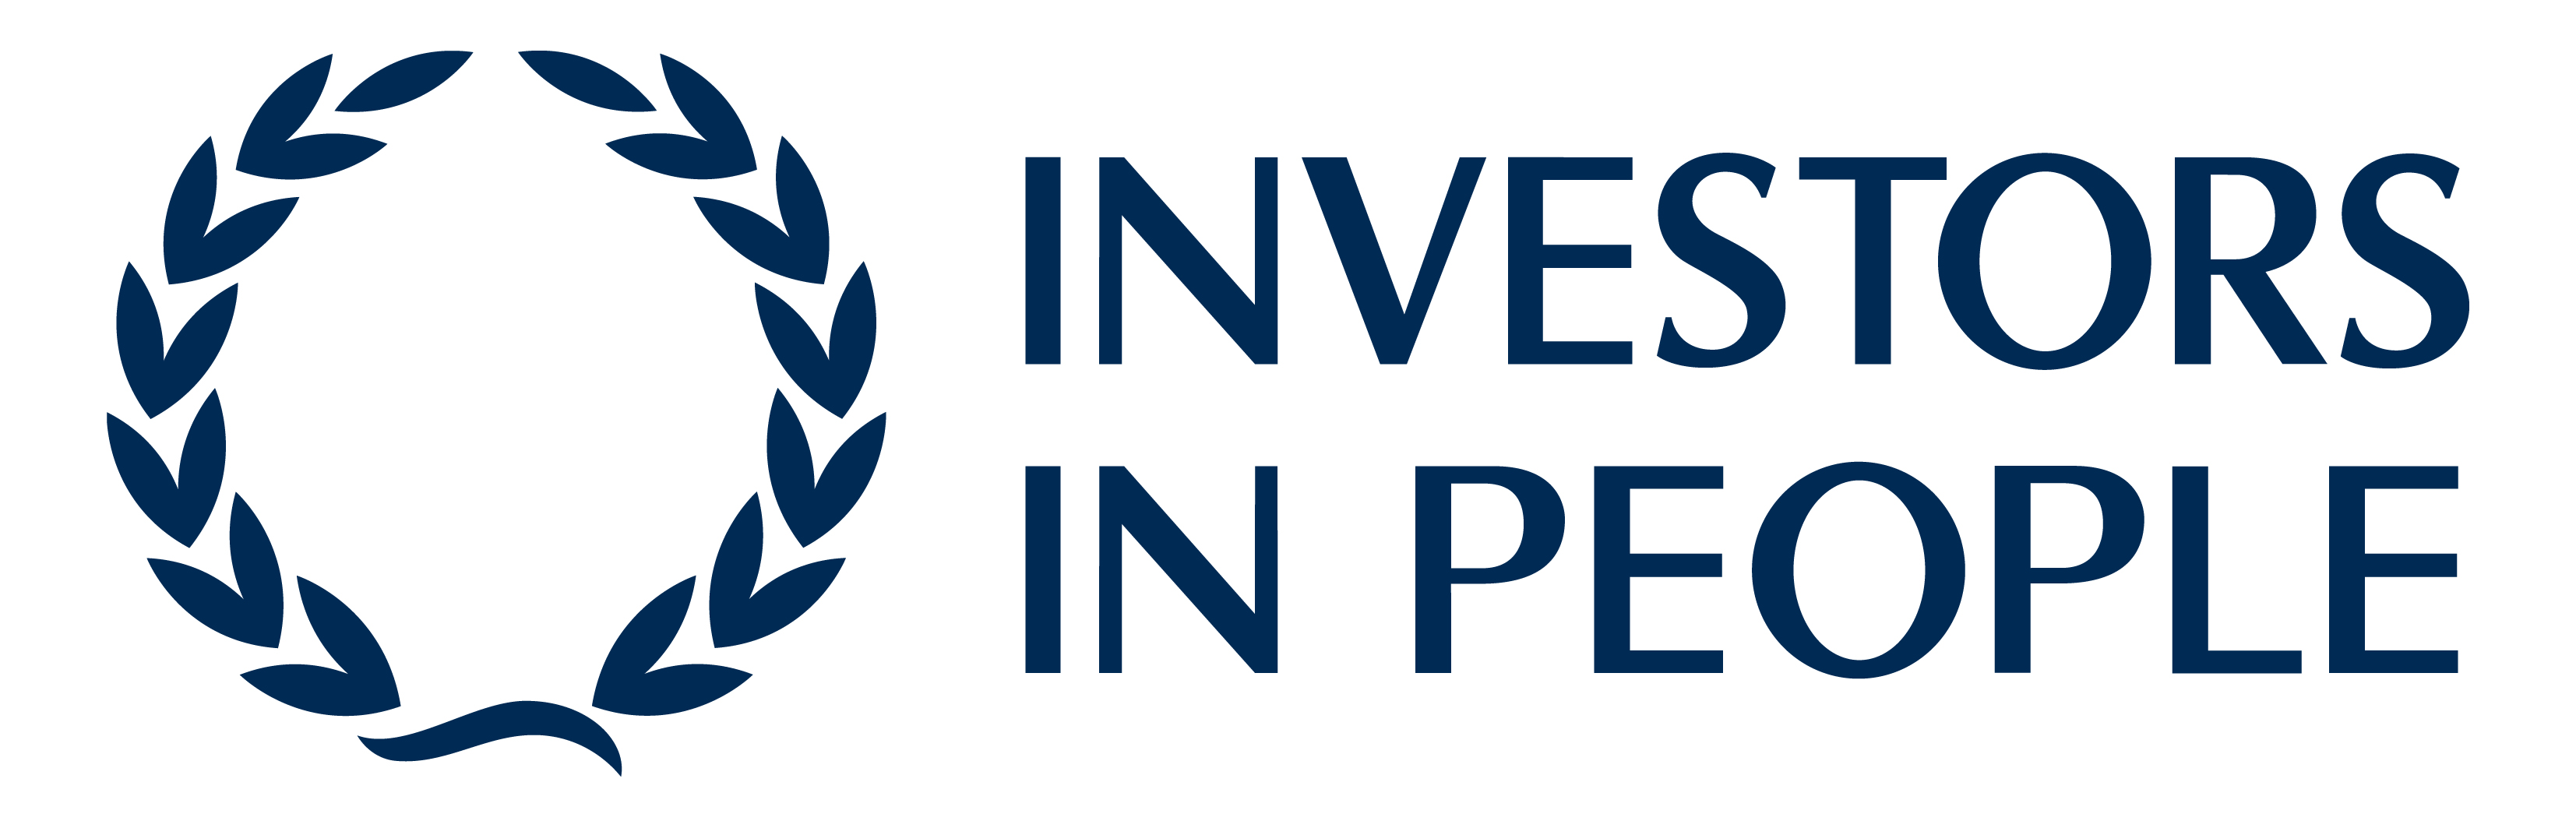 Investors in People - Connected Voice